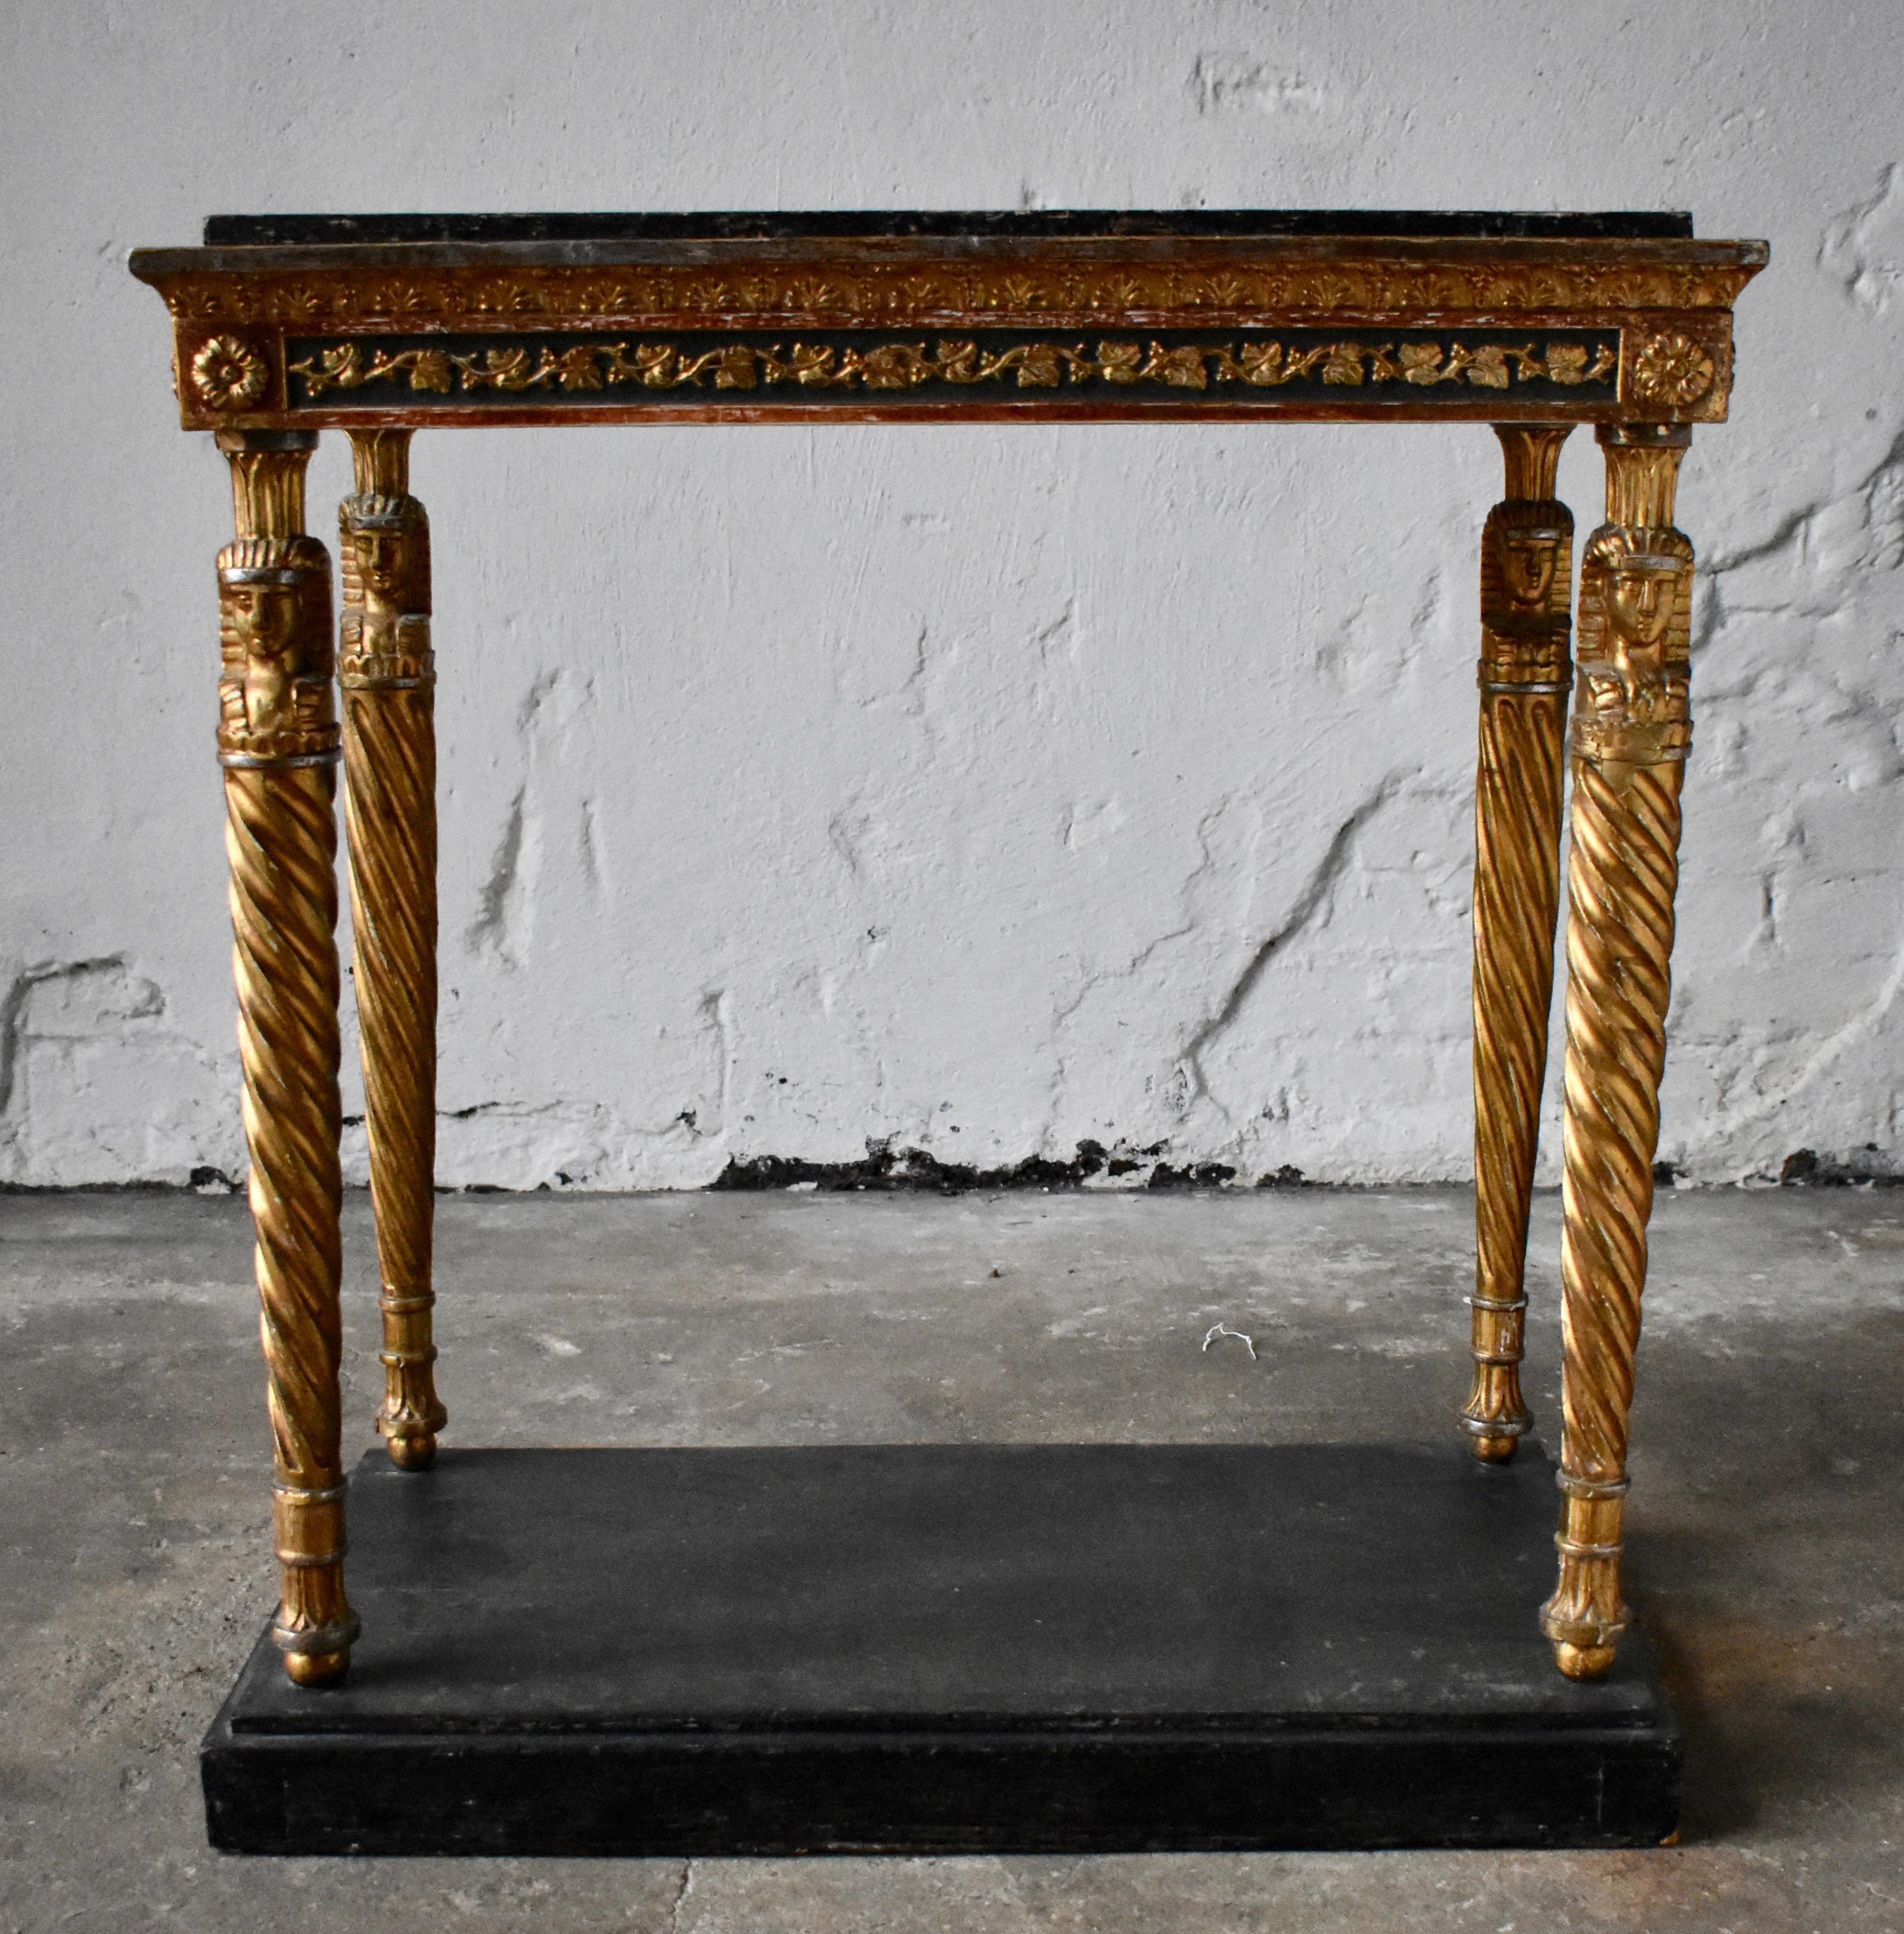 Swedish late Gustavian console table, Stockholm early 1800s
With top in imitation painted wood - (Profyr)
Bottom with carved decor of Egyptian figures -
Excellent golden plating.